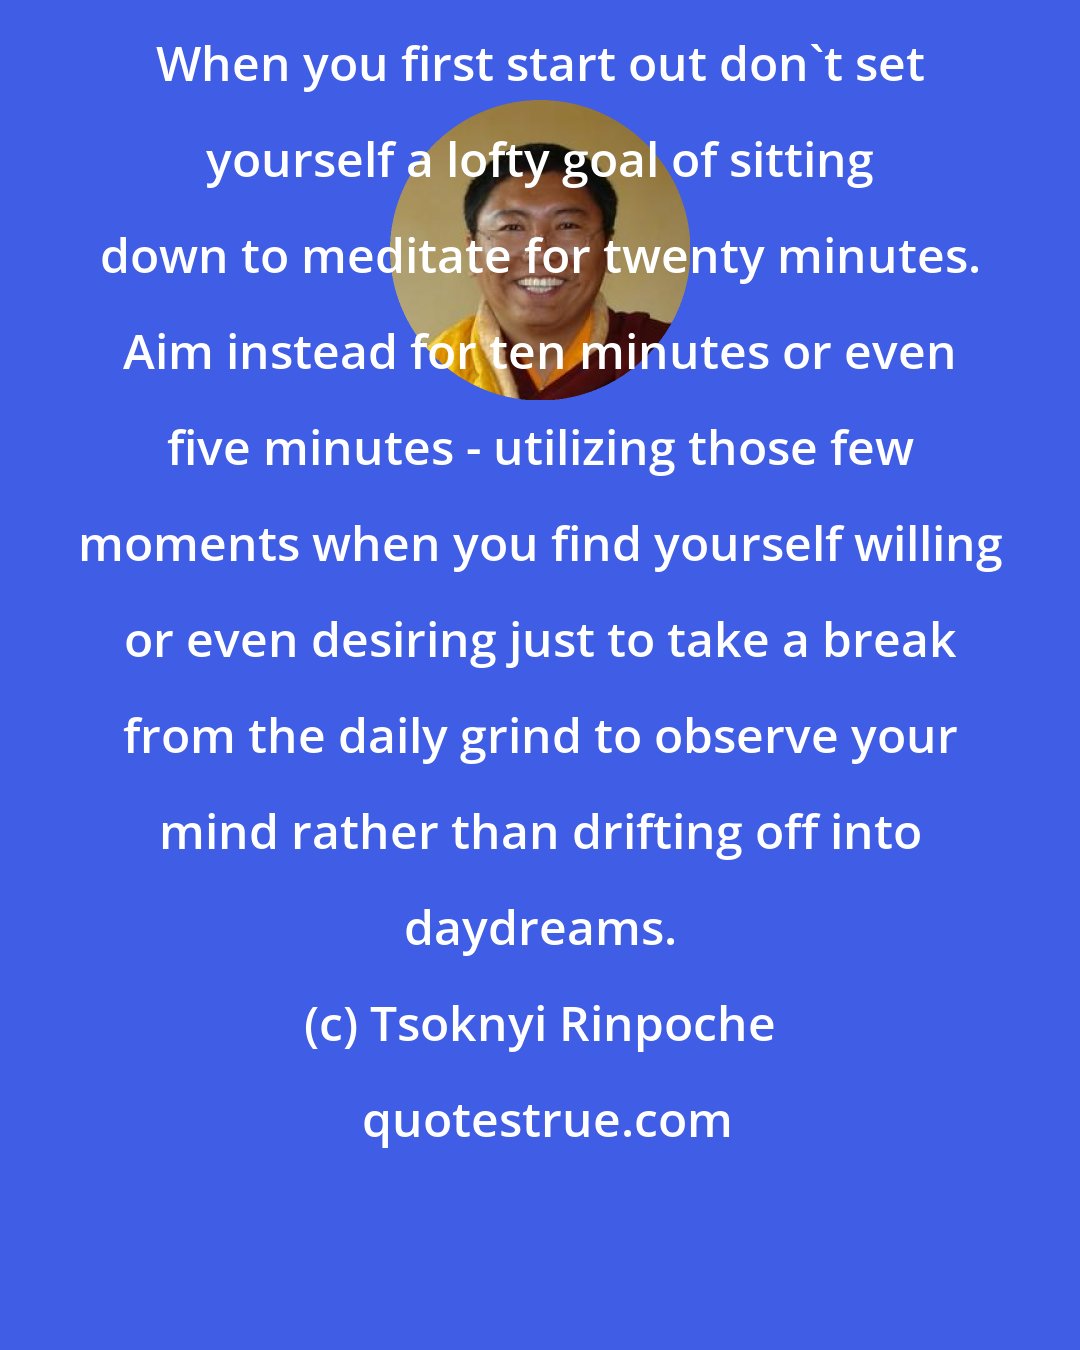 Tsoknyi Rinpoche: When you first start out don't set yourself a lofty goal of sitting down to meditate for twenty minutes. Aim instead for ten minutes or even five minutes - utilizing those few moments when you find yourself willing or even desiring just to take a break from the daily grind to observe your mind rather than drifting off into daydreams.